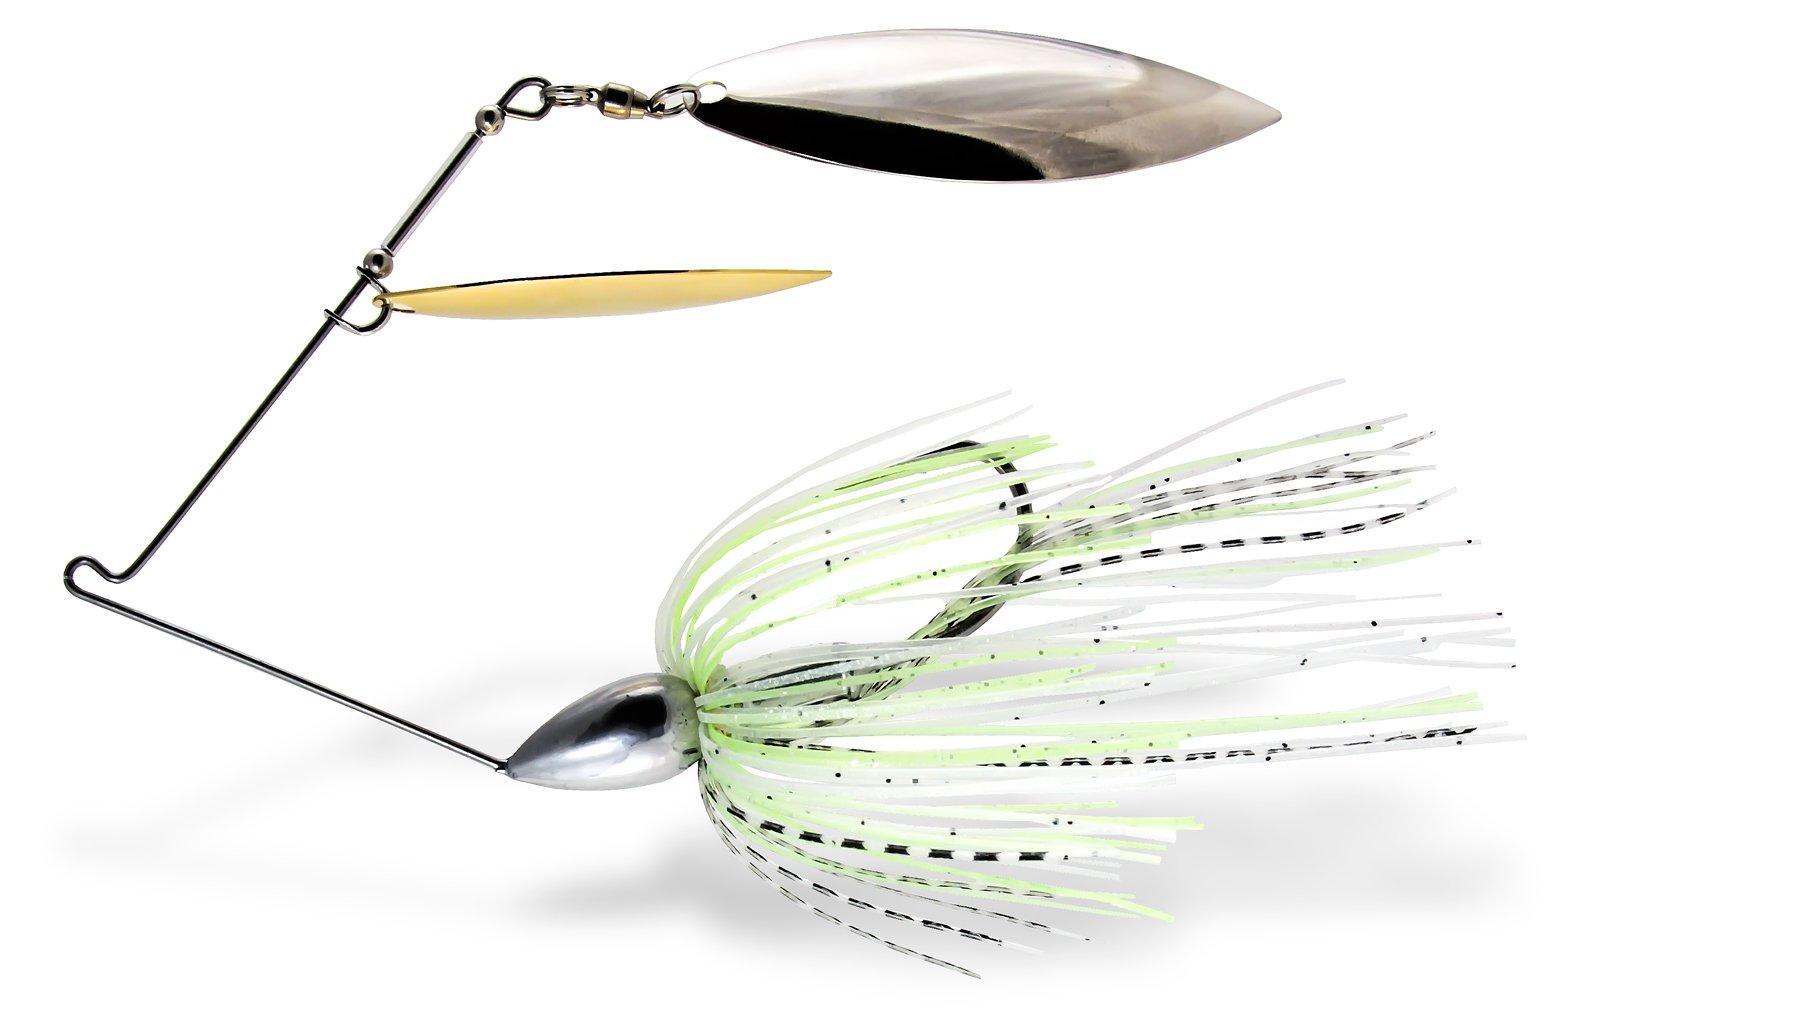 War Eagle Spinnerbait Review - Wired2Fish